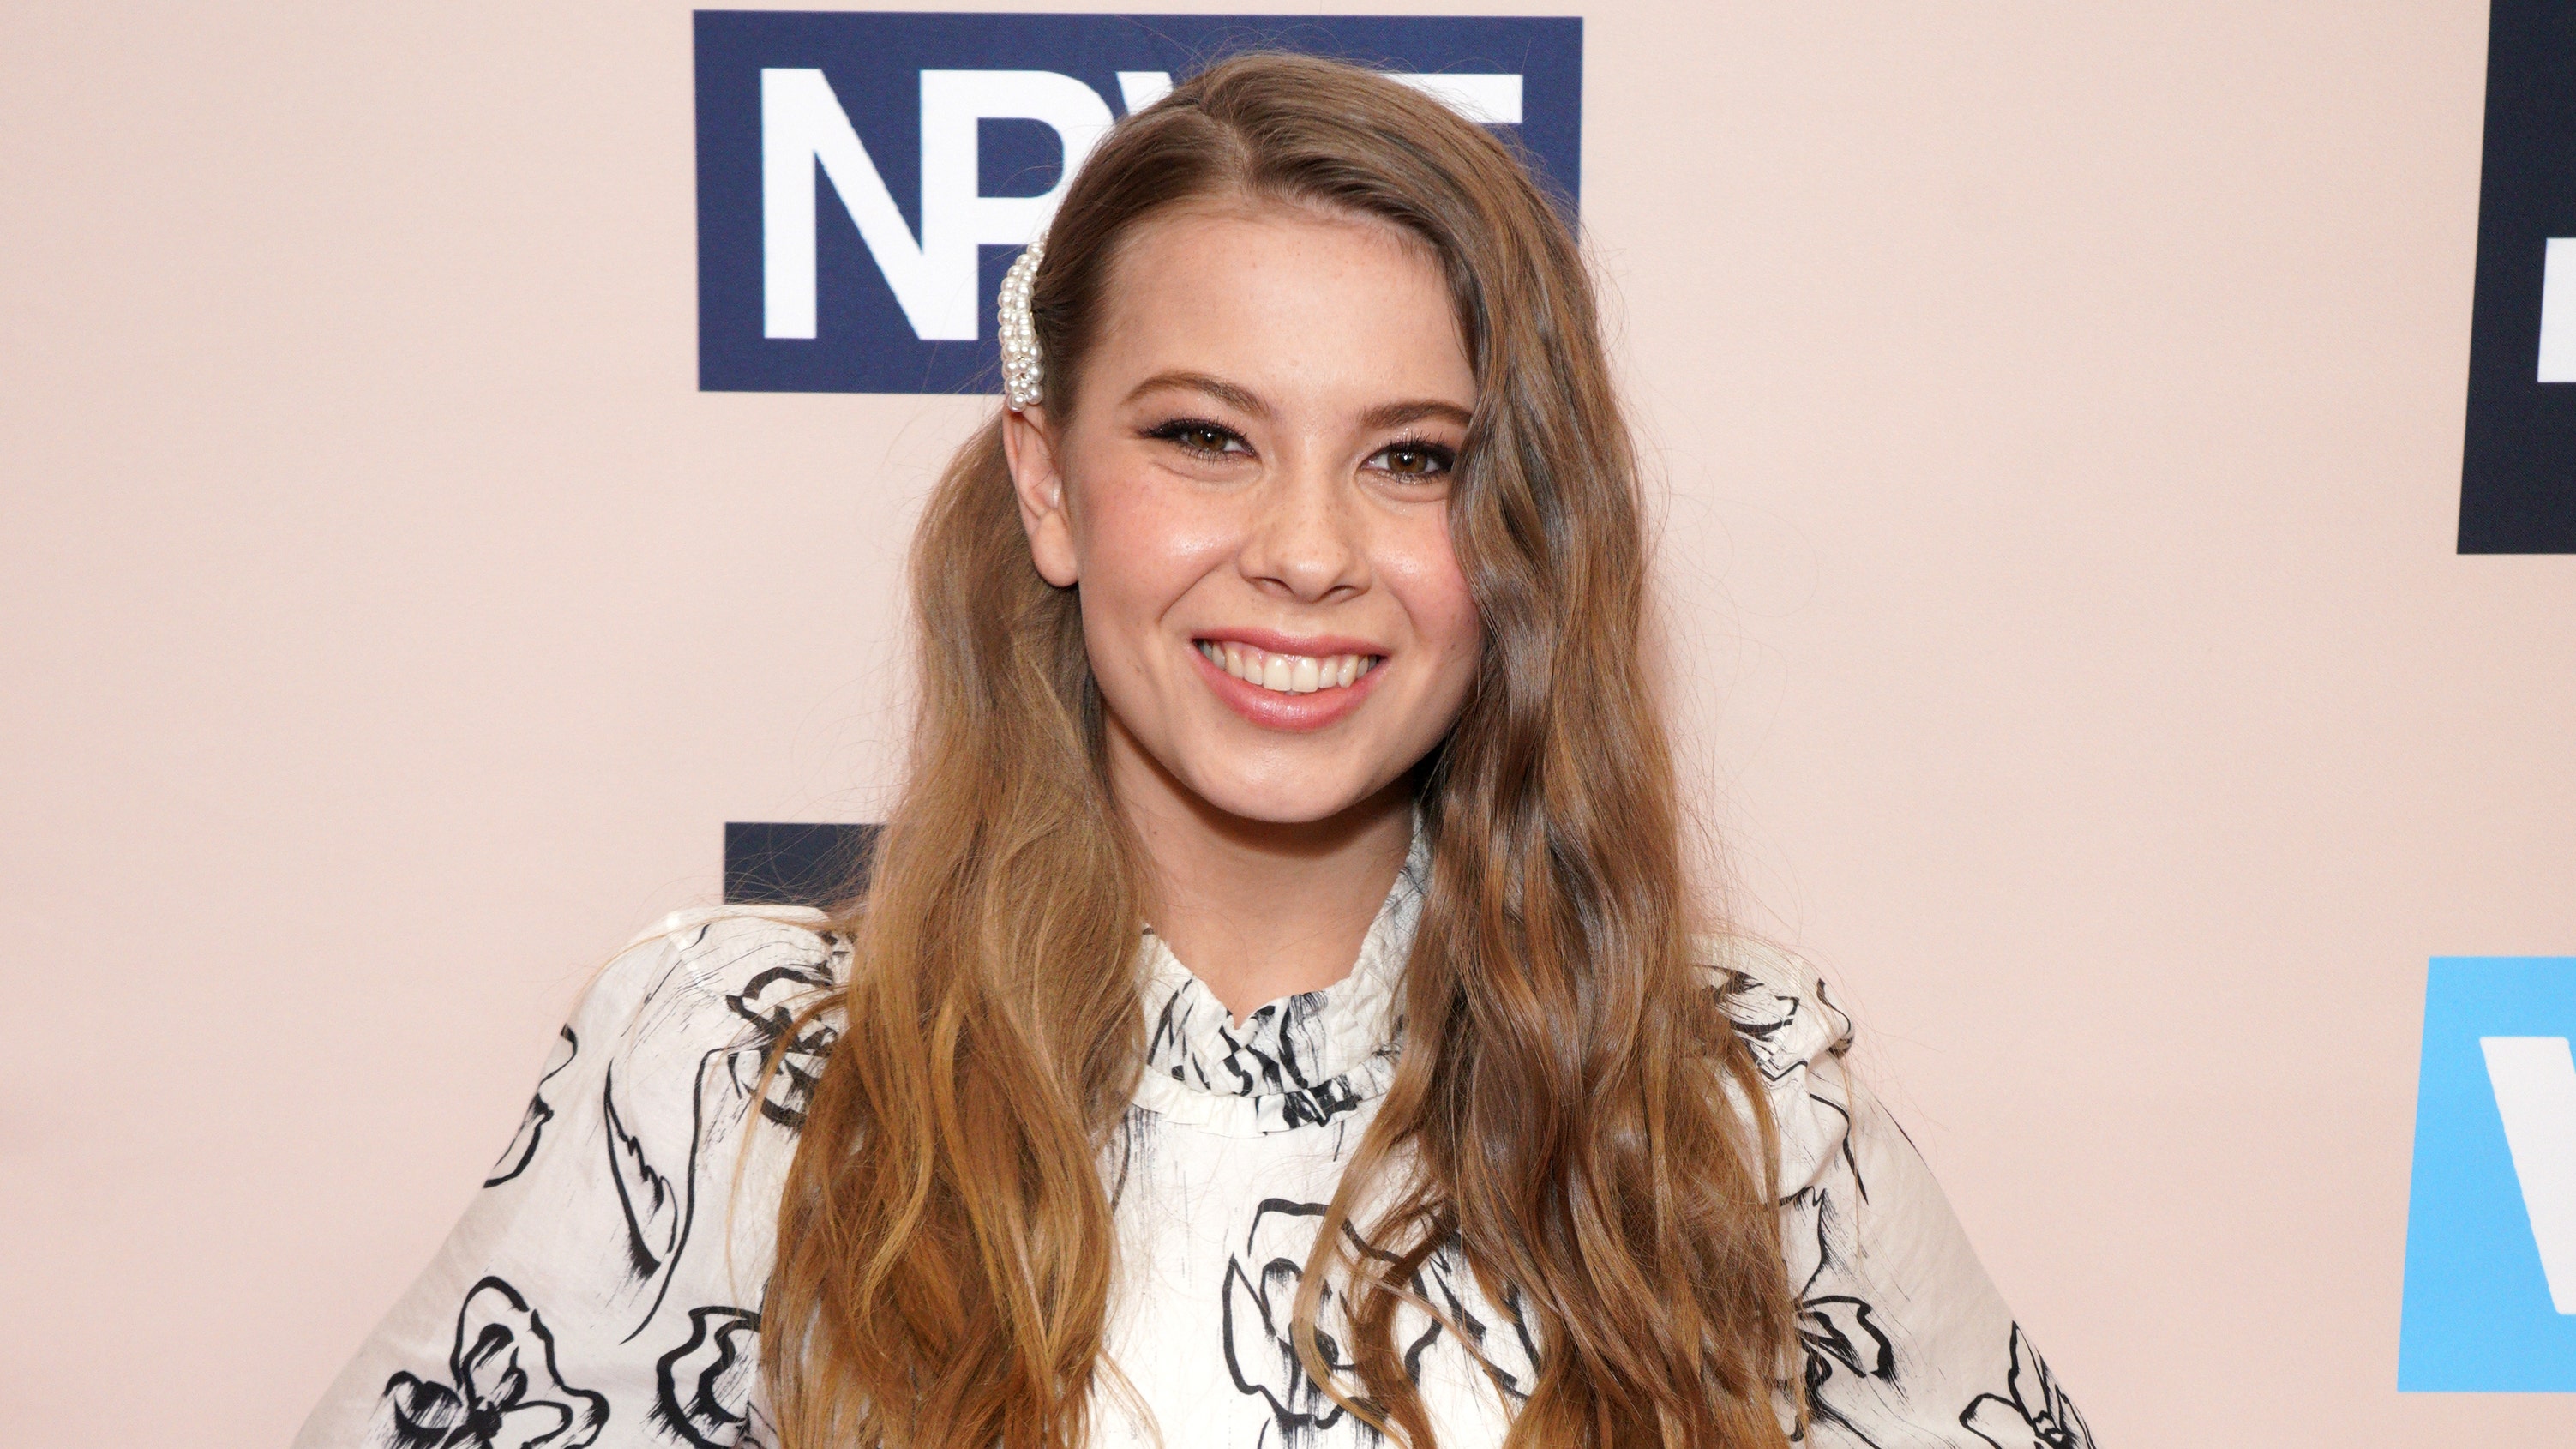 Bindi Irwin recreates the adorable maternity photo of the family: ‘Special moment’